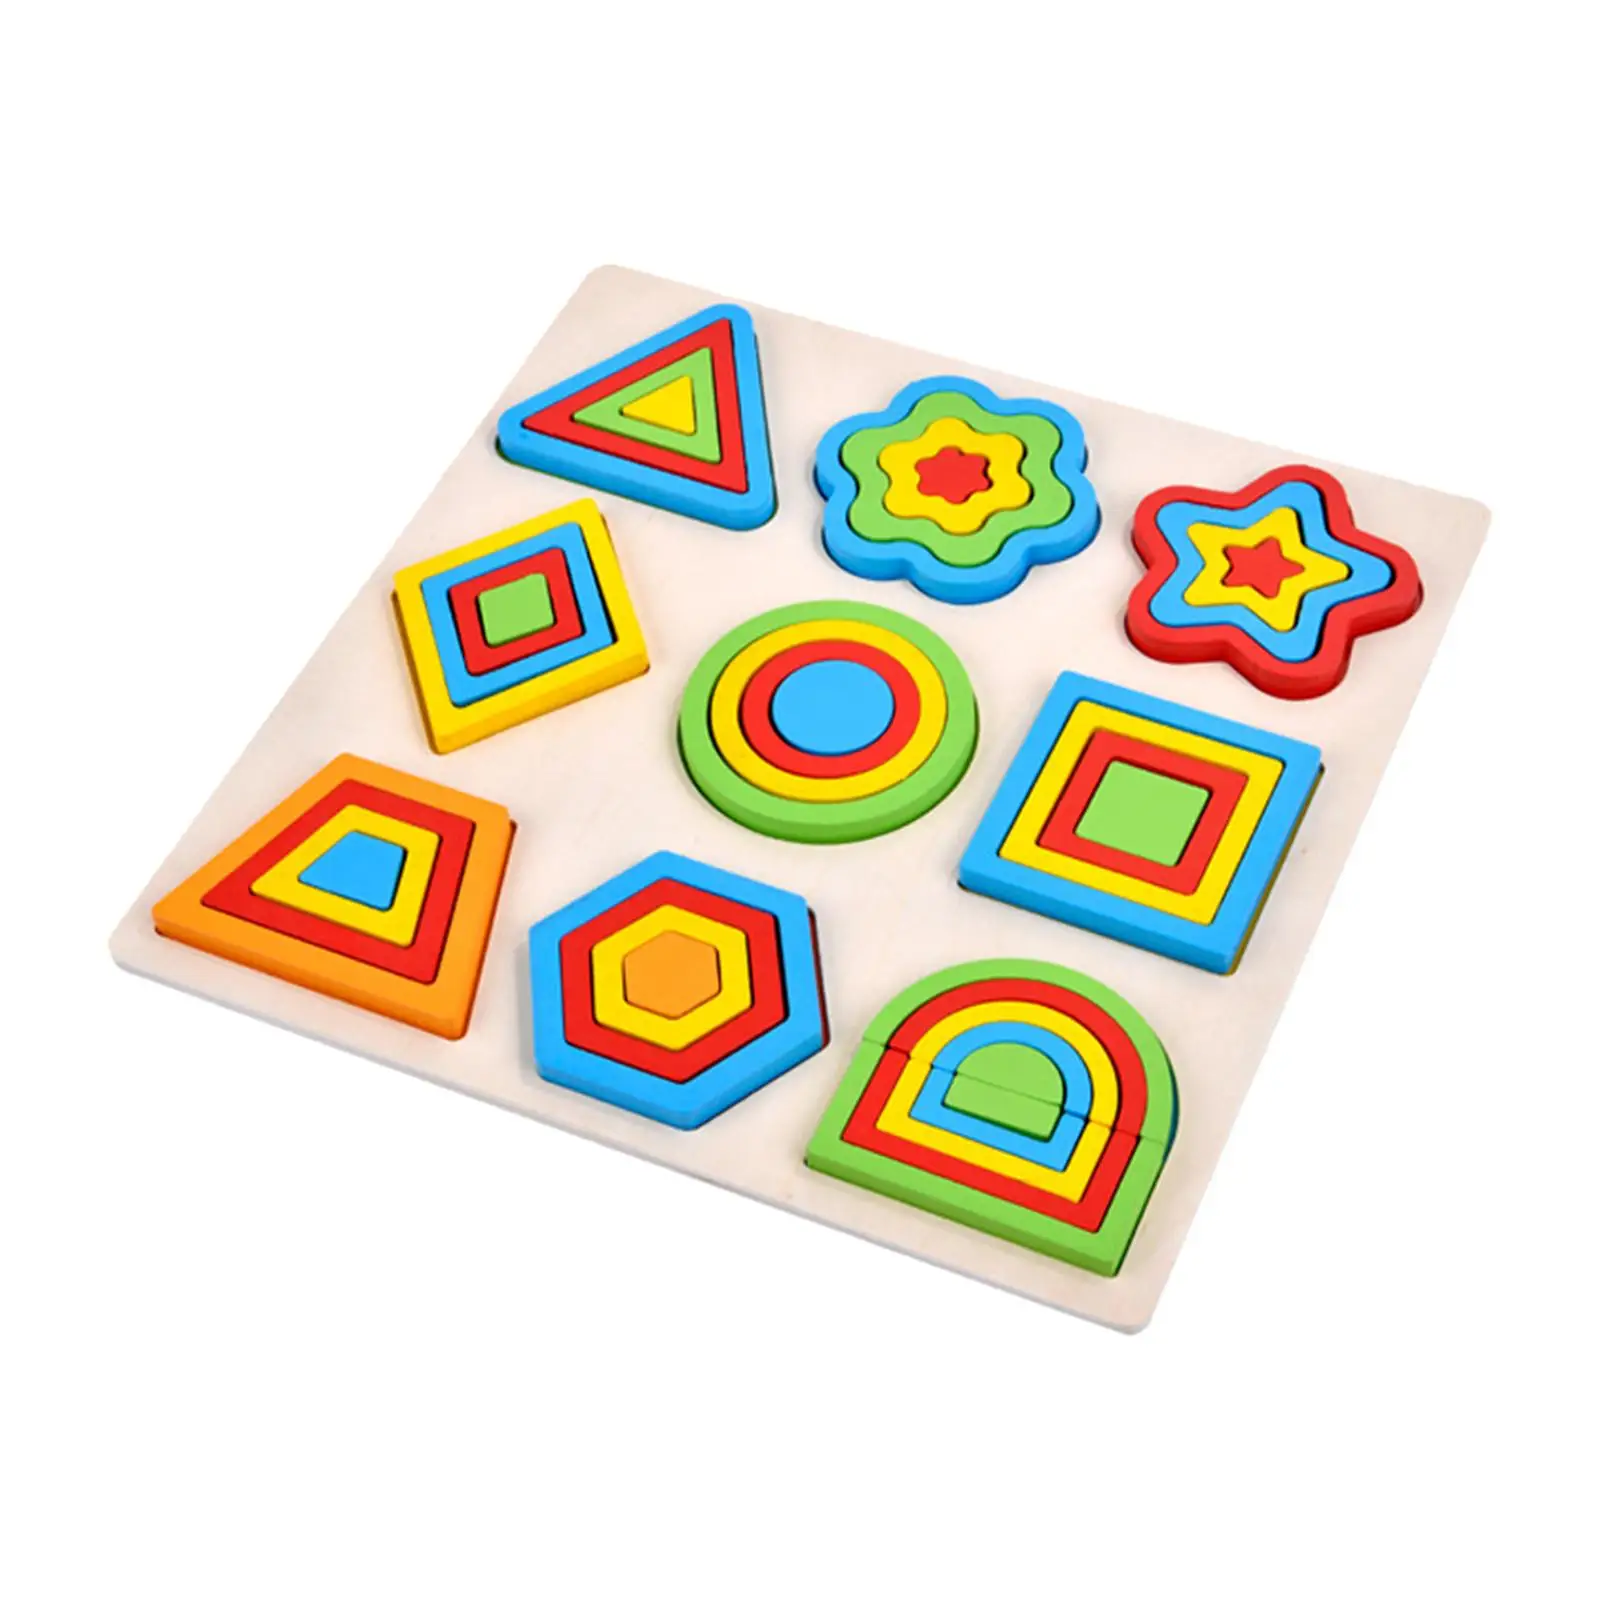 Wooden Puzzle Learning Geometry Teaching Aids Fine Motor Skills Manipulative Puzzle for Girls Boys Toddlers Children Kids